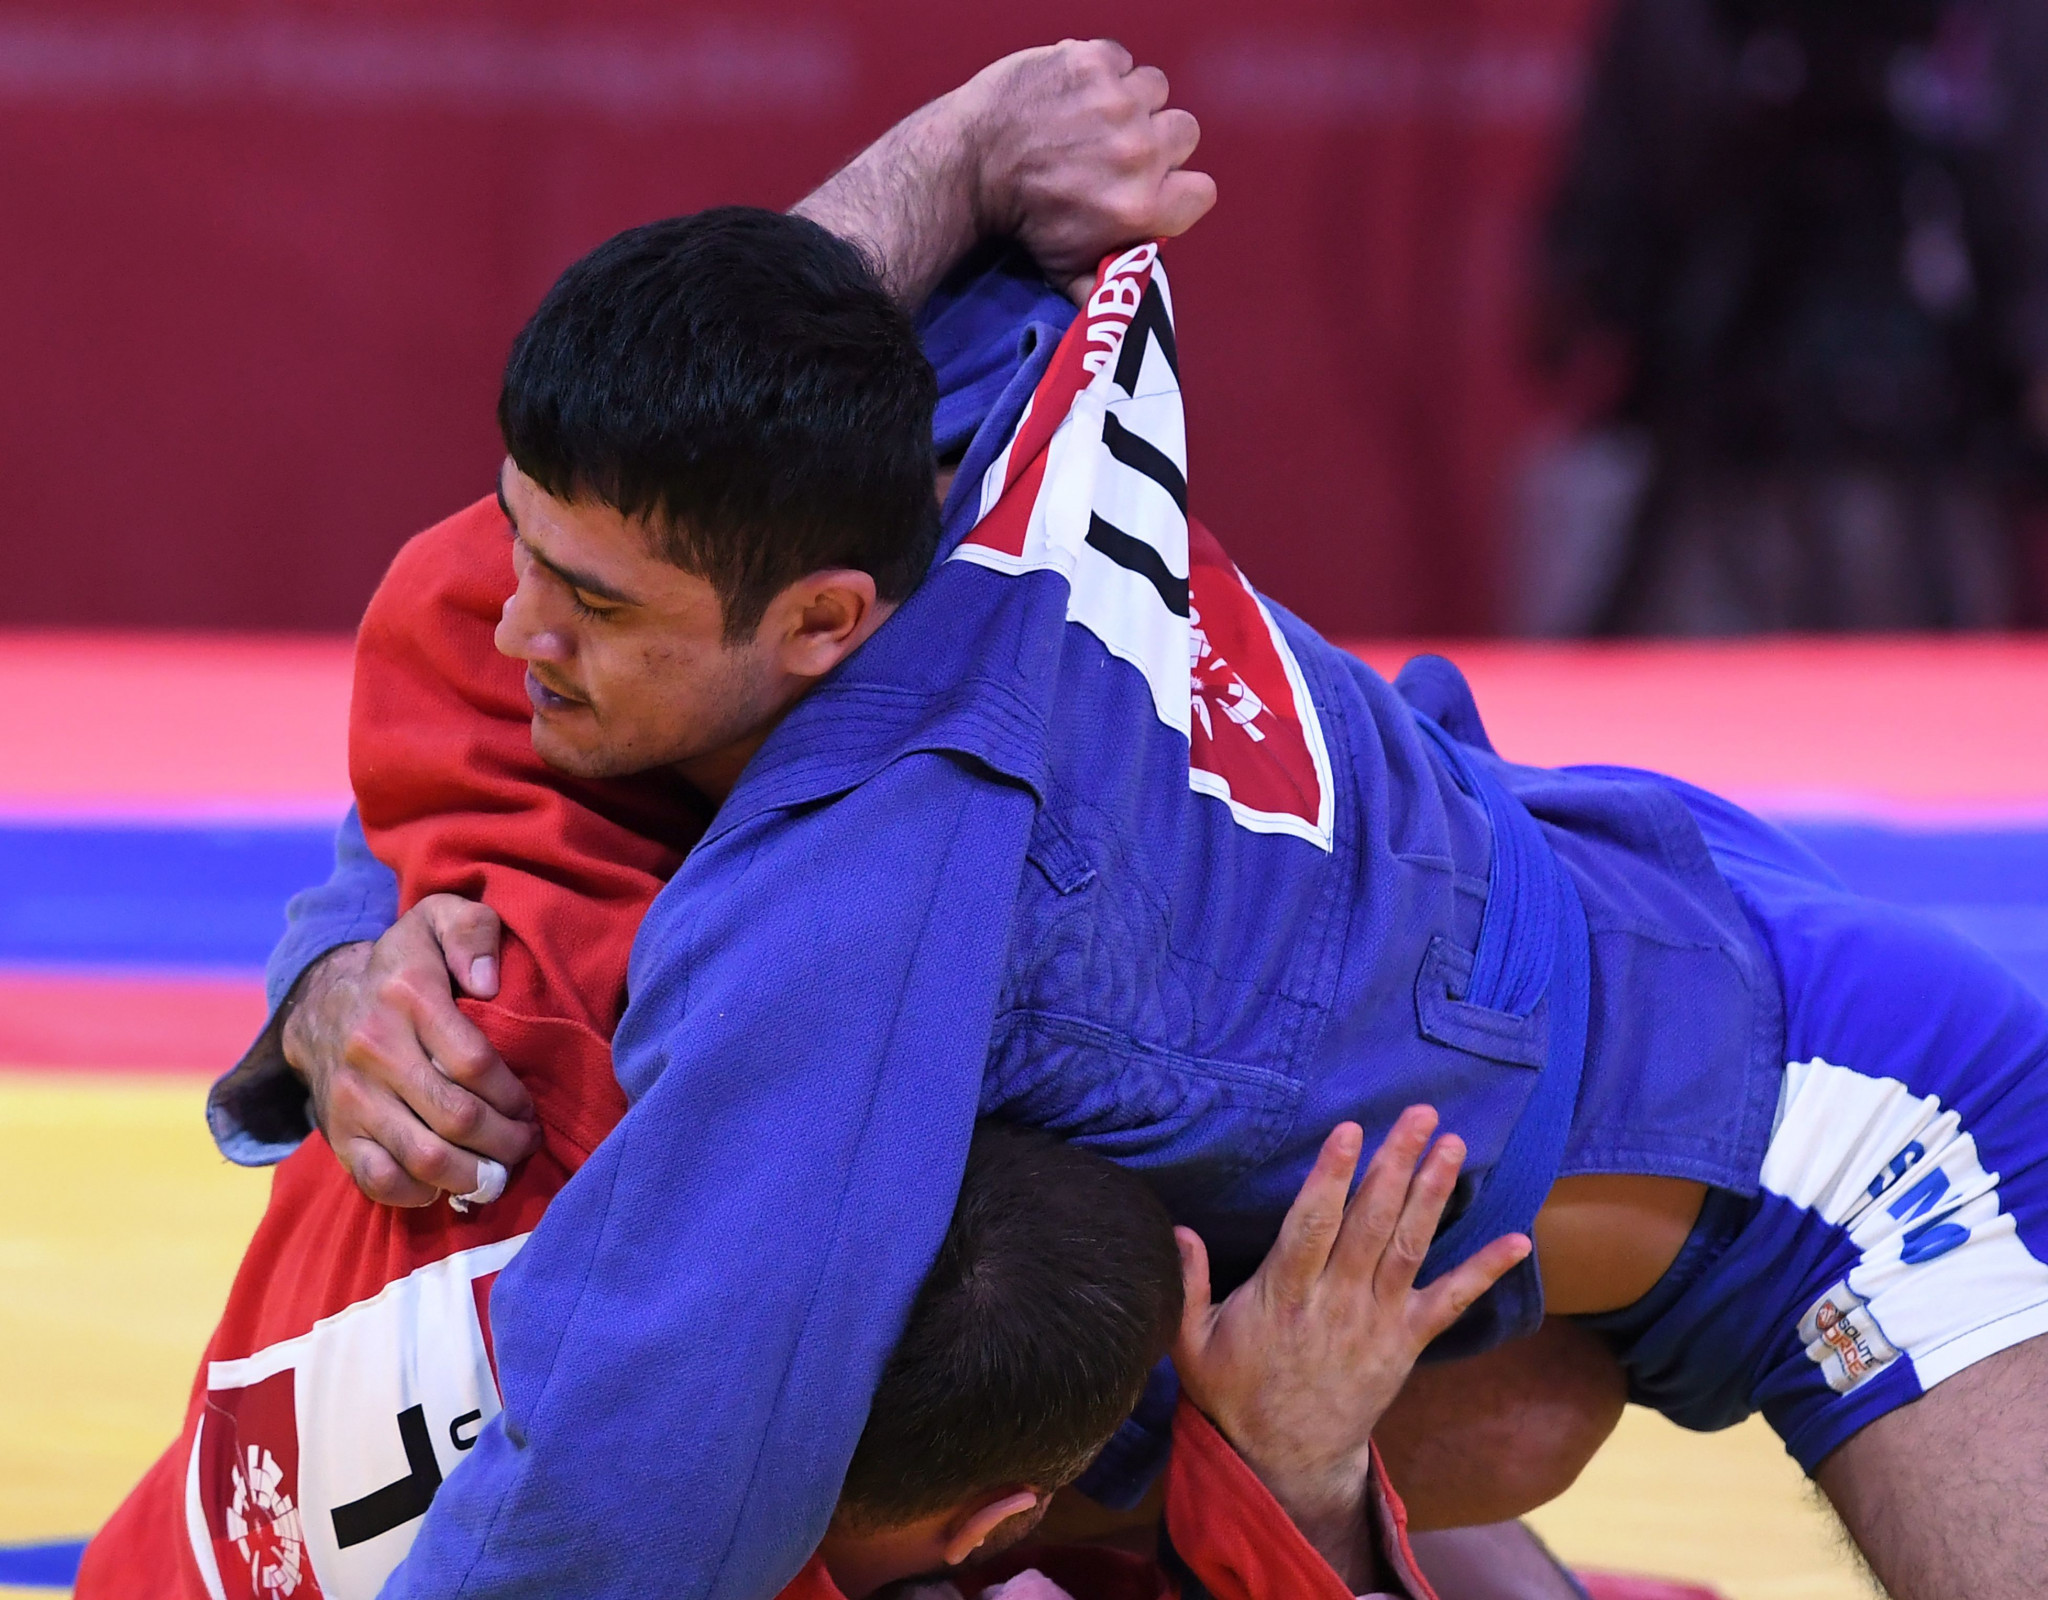 The event will challenge players on their knowledge of sambo techniques ©Getty Images